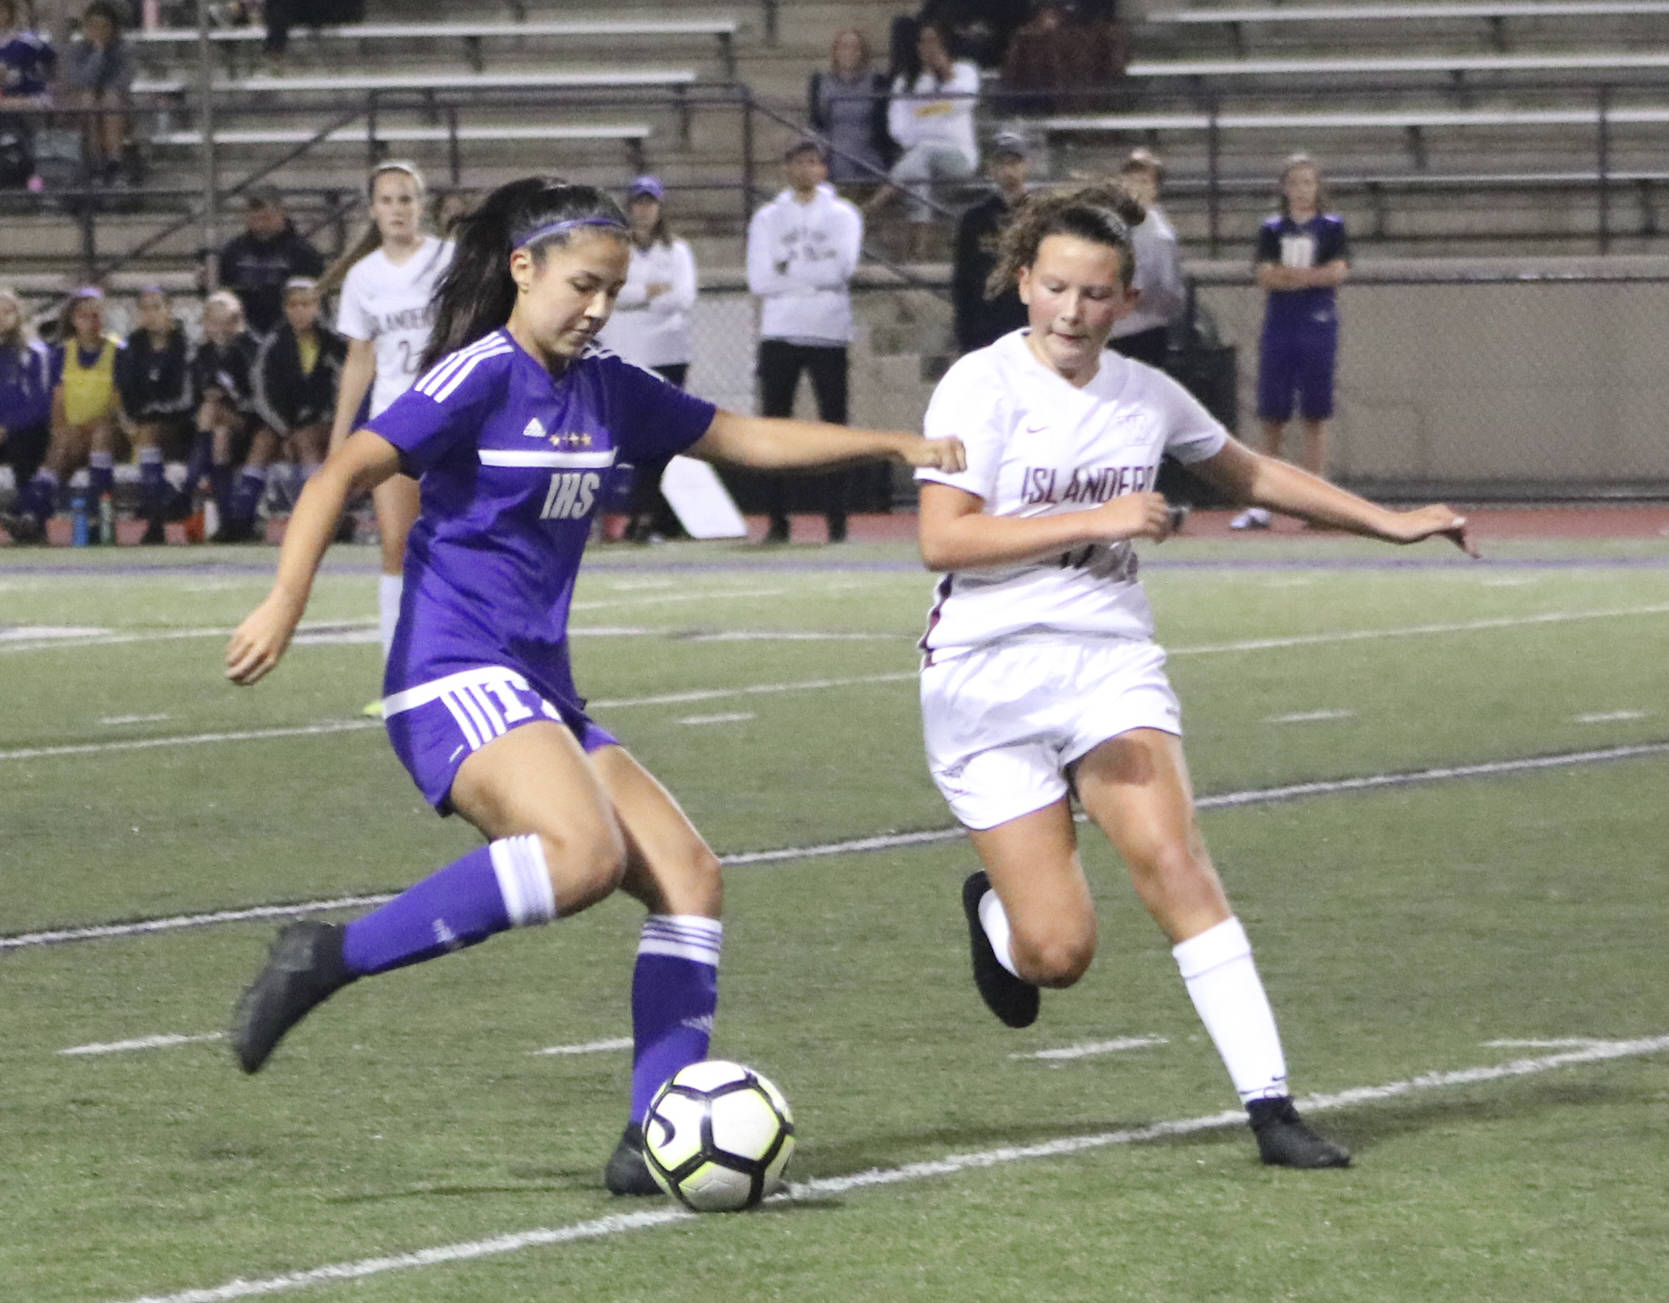 Islanders freshman Arden Paglia (in white) tries to take the ball off Eagles midfielder Kira Terao (in purple) during a 6-0 loss to Issaquah. Benjamin Olson/ staff photo